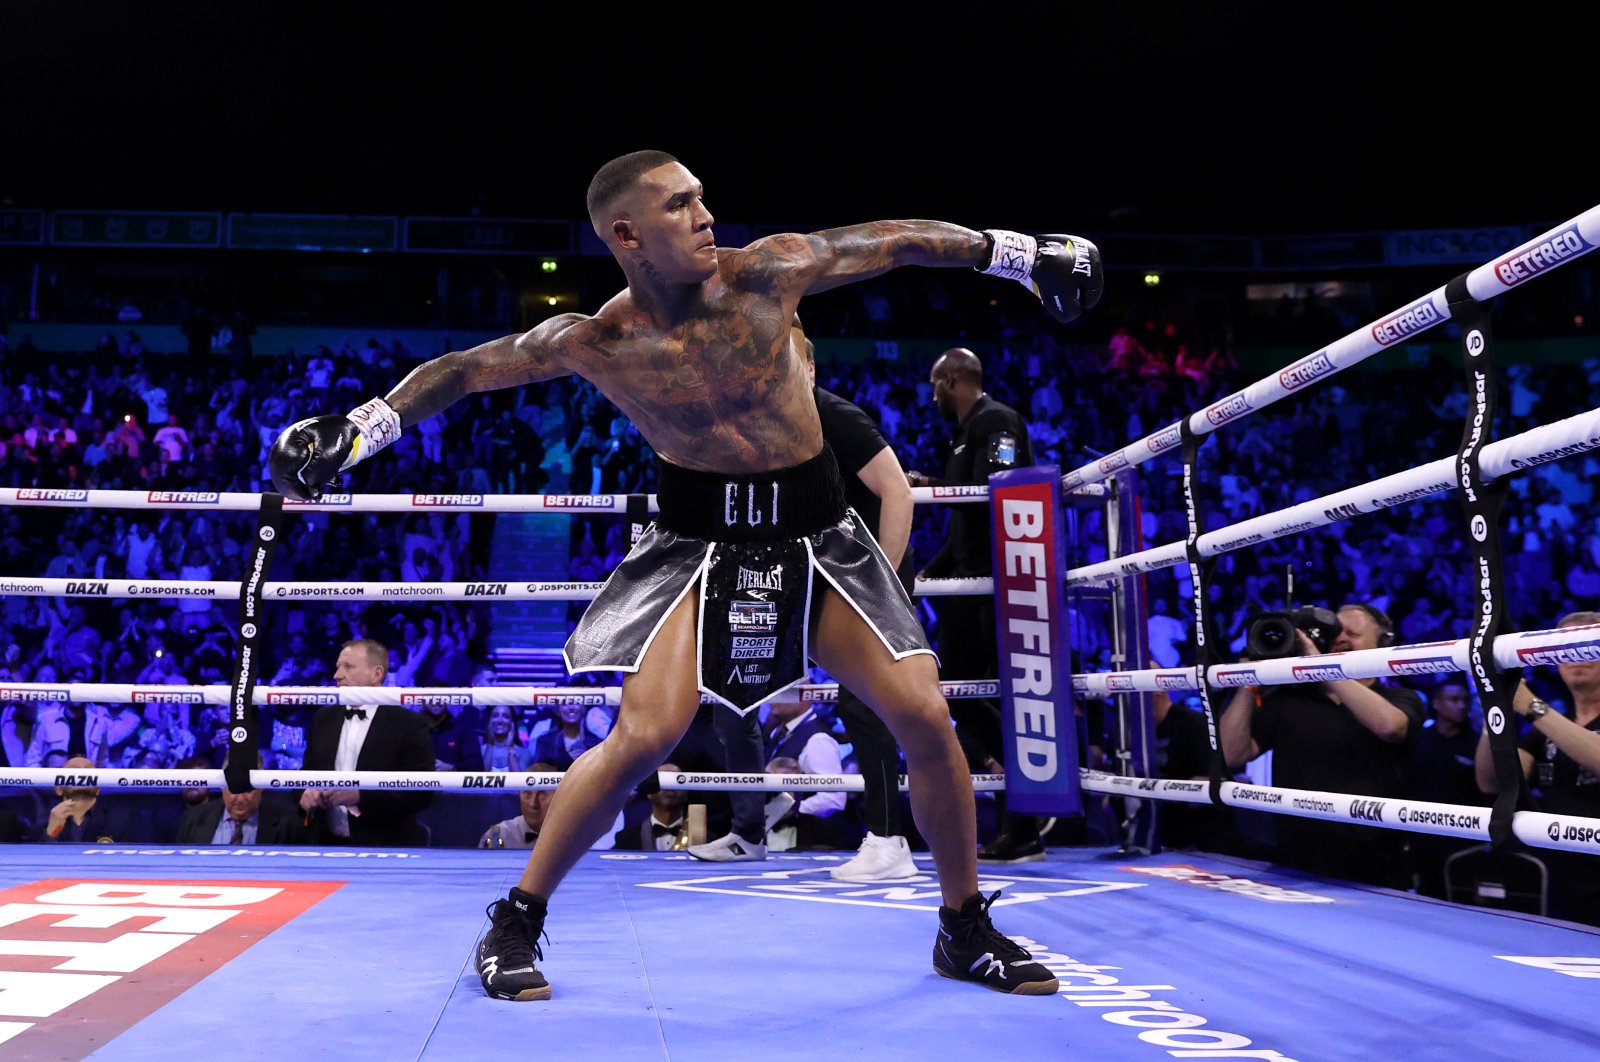 Conor Benn celebrates after victory in the WBA Continental Welterweight Title fight between Conor Benn and Chris Van Heerden at AO Arena, Manchester, England, April 16, 2022. (Getty Images Photo)